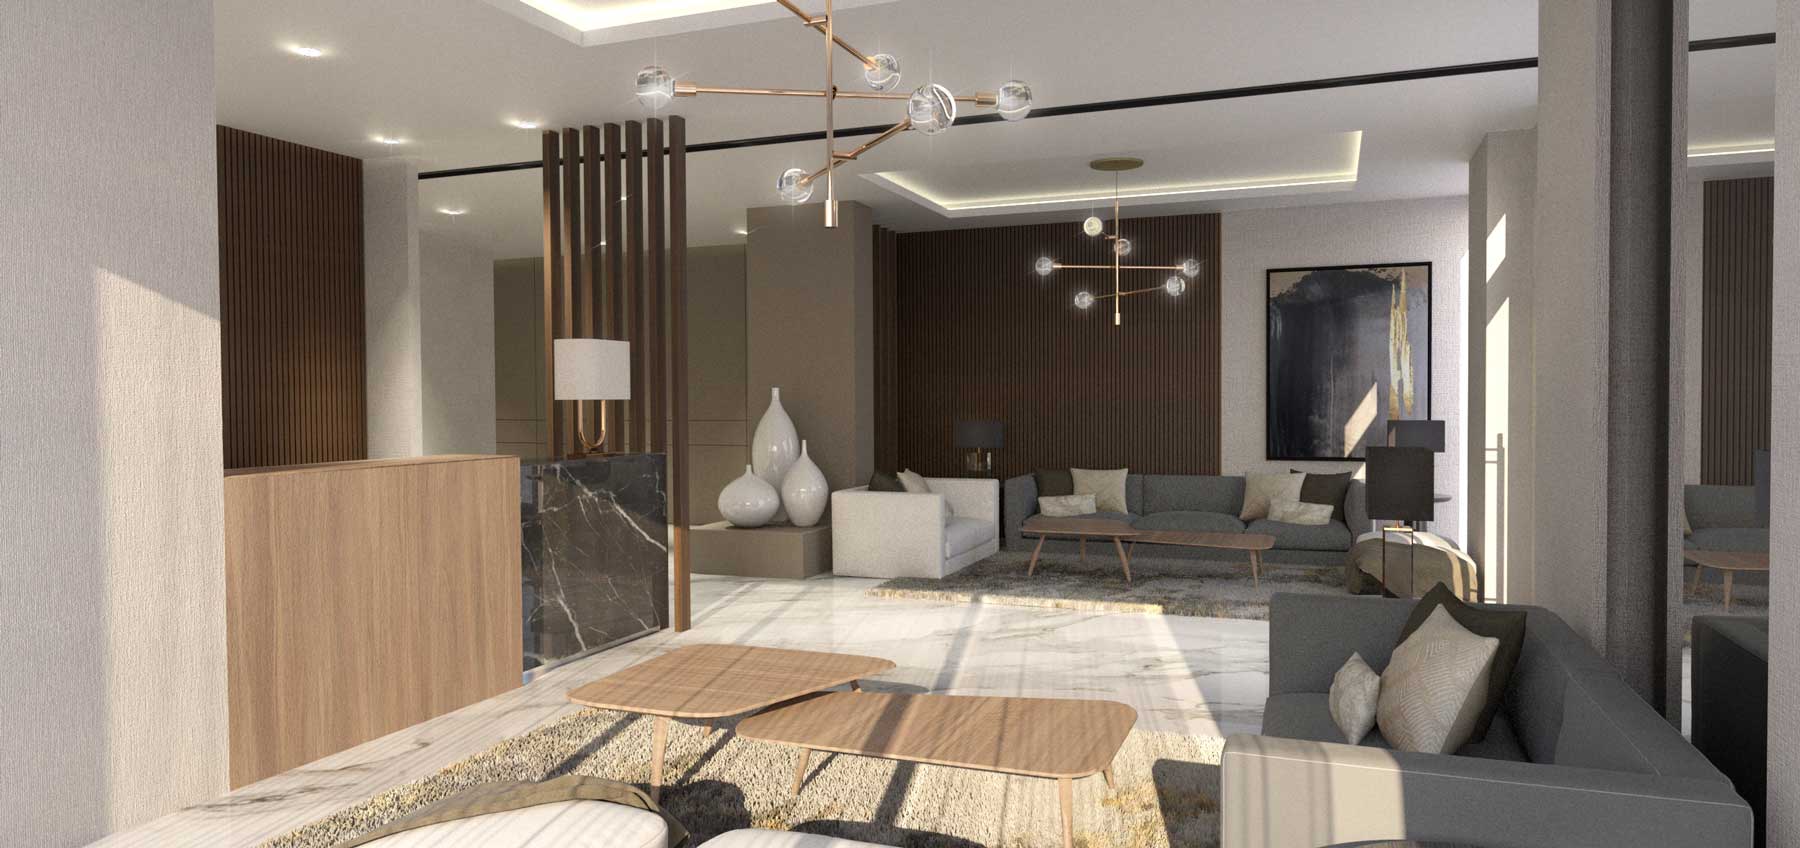 The Garden City lobby design, by WTA Architecture and Golden Bay Land Holdings, conceptualizes the interior design with luxury living in the urban city